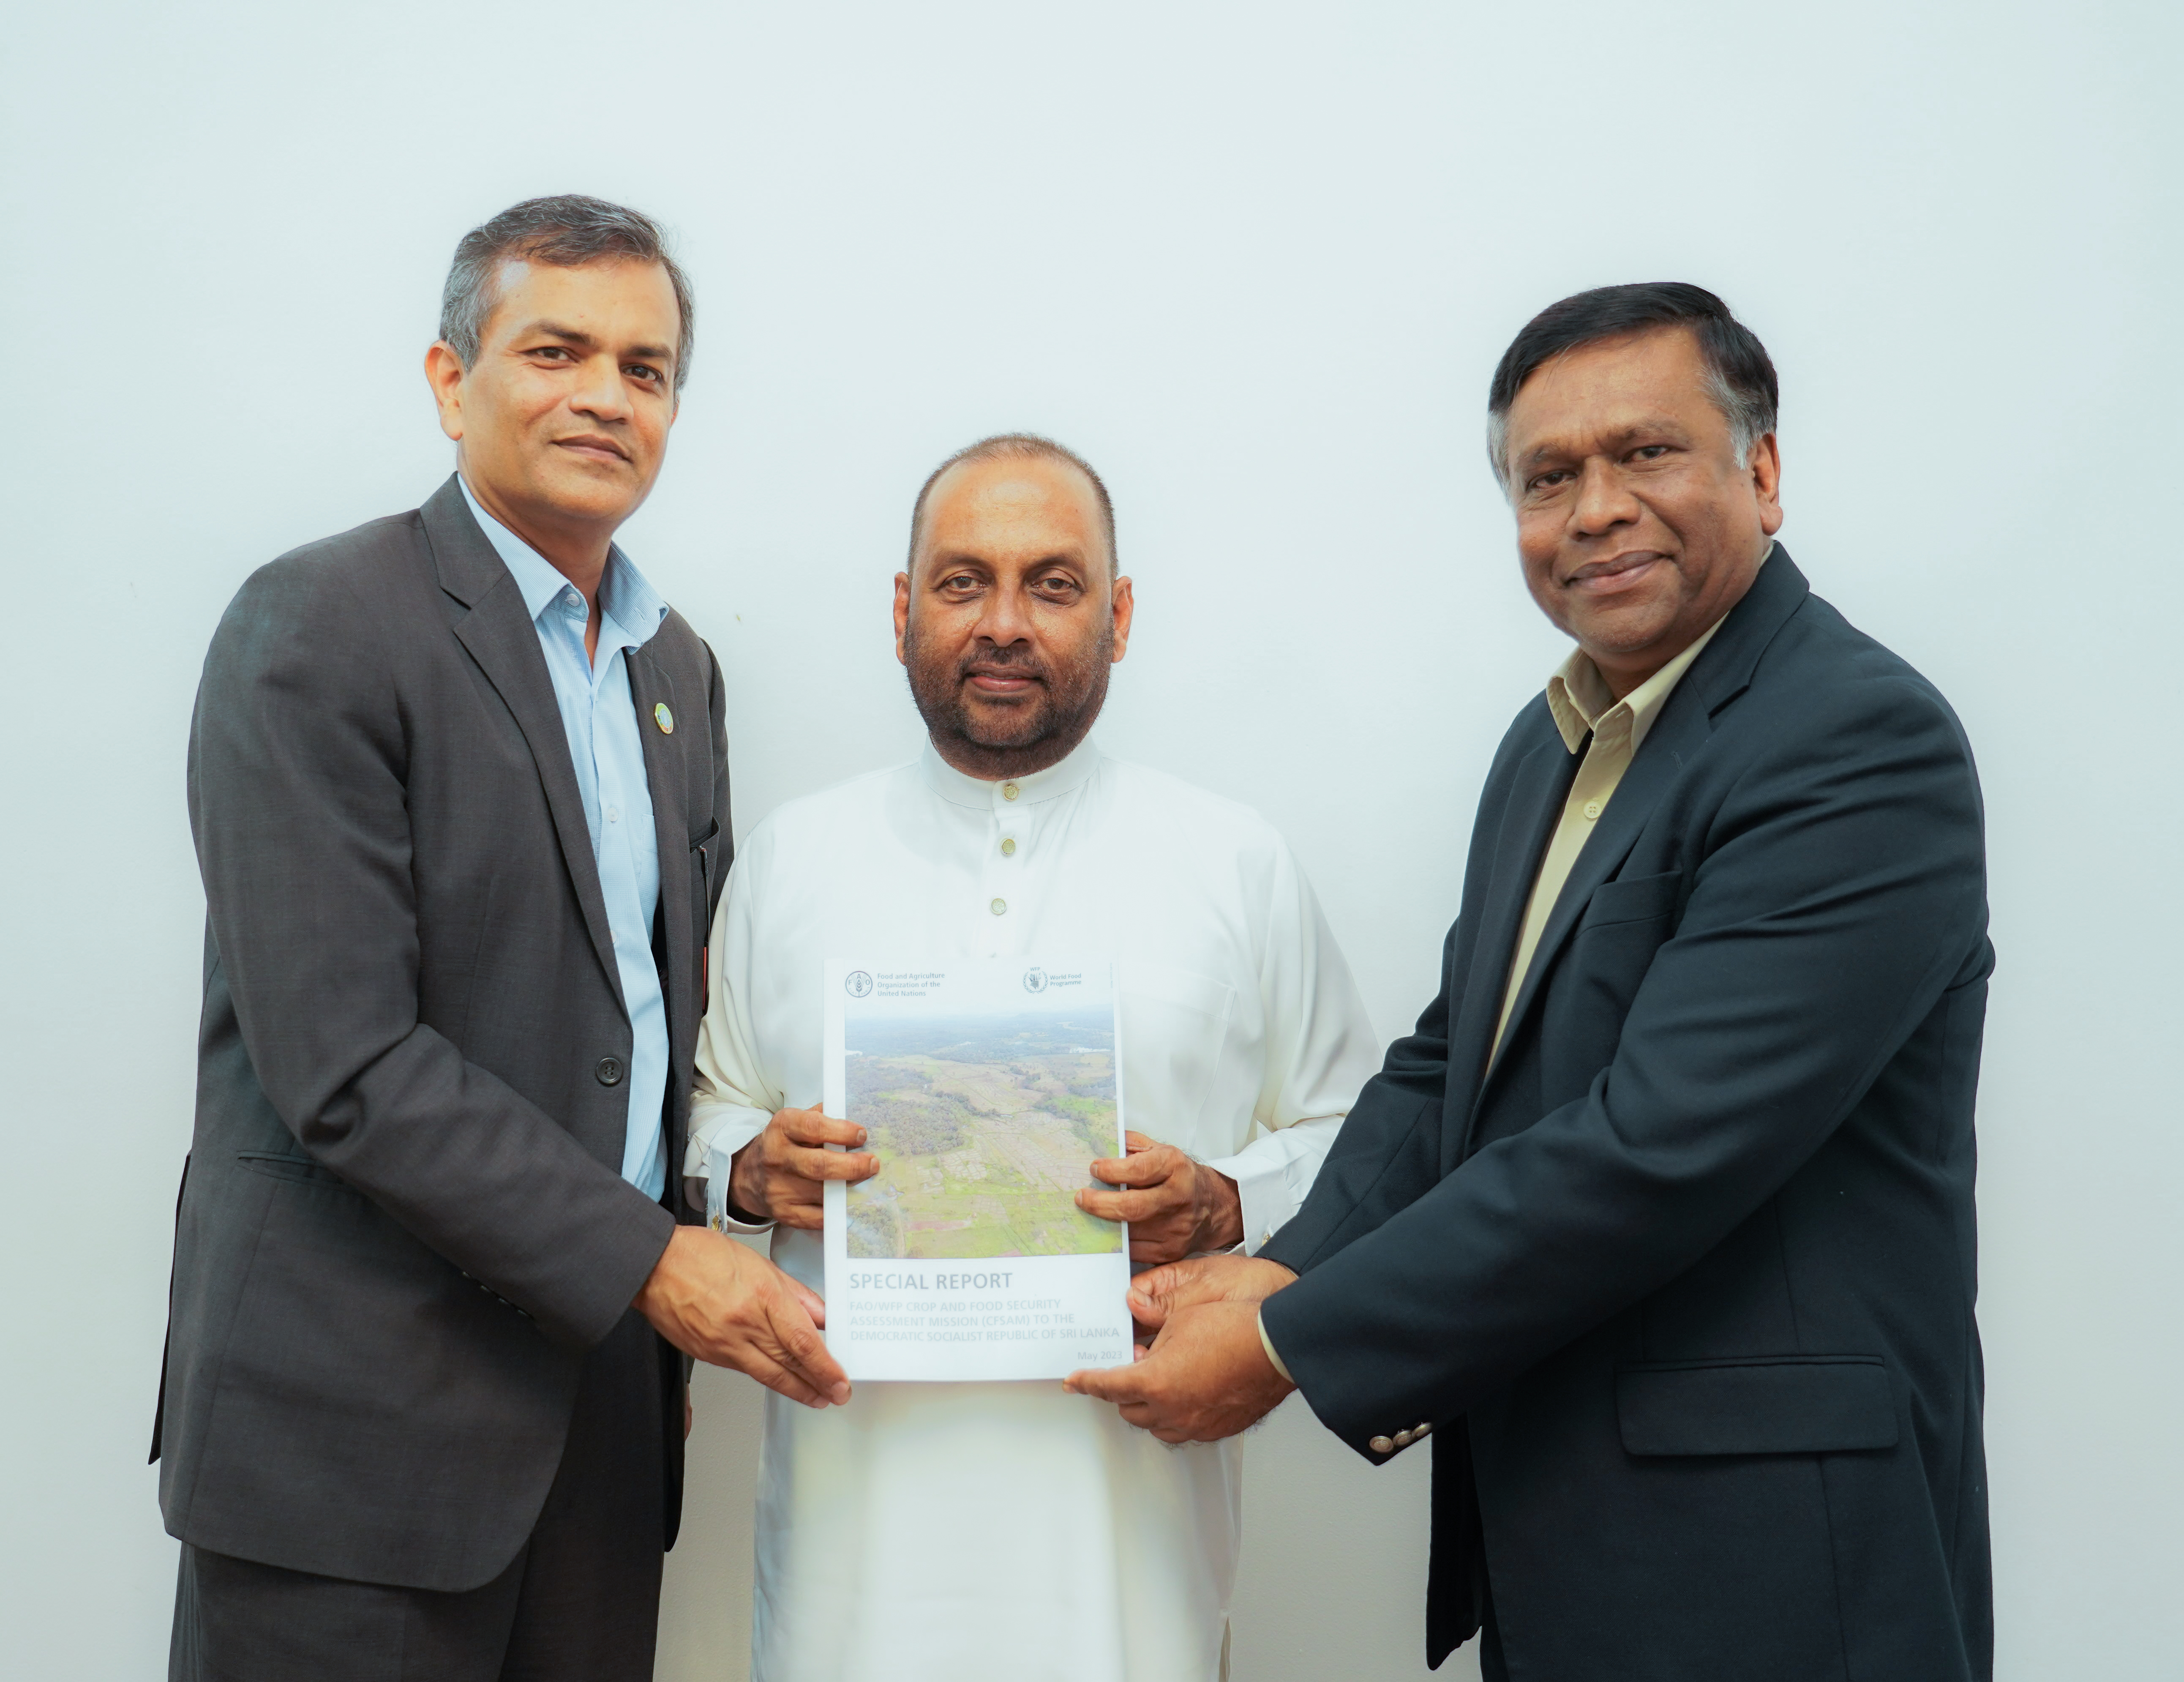 Photo: WFP/ Photogallery. The second joint FAO-WFP Crop and Food Security Assessment Mission (CFSAM) report on Sri Lanka was handed over to the Minister of Agriculture, Mahinda Amaraweera, by FAO Representative for Sri Lanka and the Maldives, Vimlendra Sharan and WFP Sri Lanka Representative and Country Director, Abdur Rahim Siddiqui.